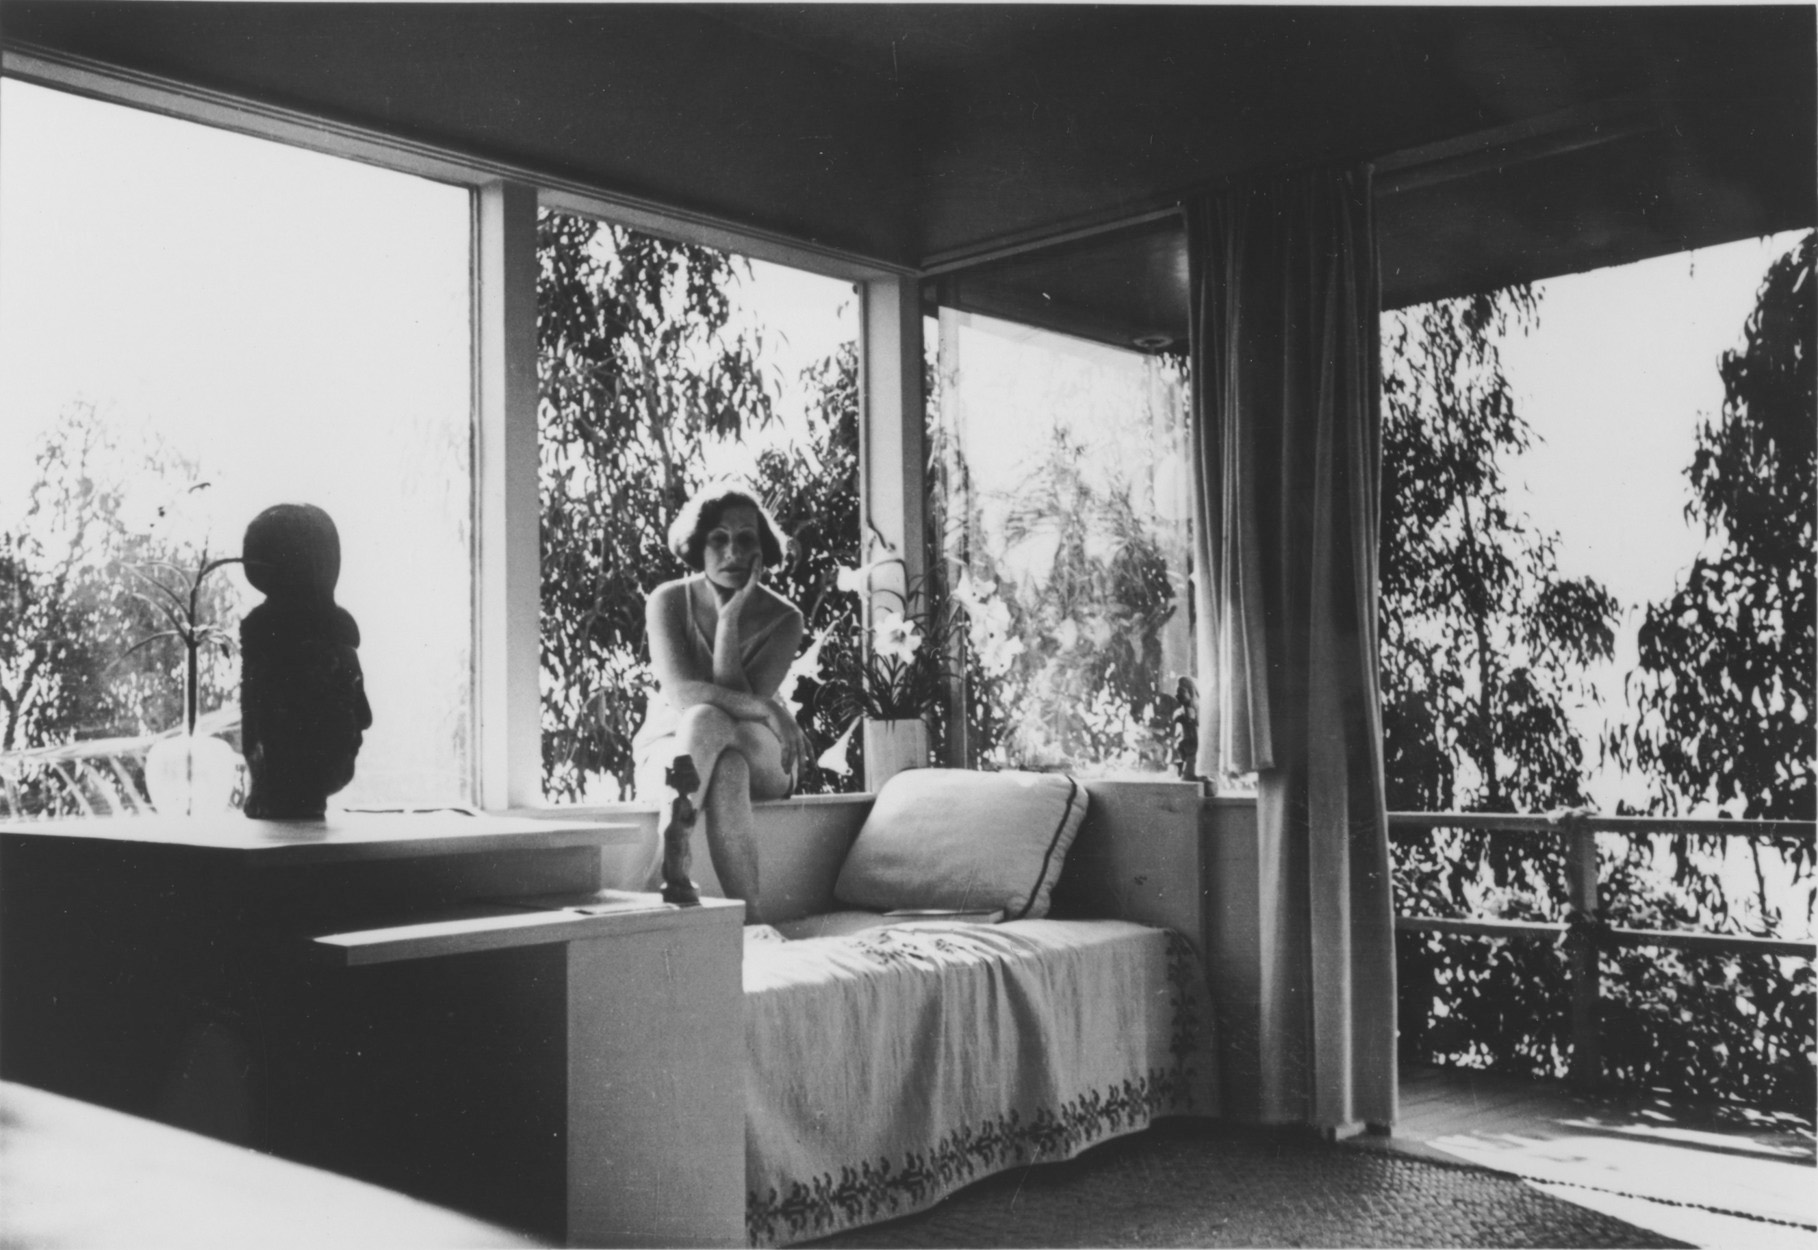 Galka Scheyer in her Hollywood Hills house designed by Richard Neutra. Lette Vaselka, <em>Galka Scheyer in Sunsuit, Seated on Windowsill</em>, ca. 1940-43. Photograph, 3 1/2 x 4 3/4 in. Courtesy of the Blue Four Galka Scheyer Collection Archives, Norton Simon Museum, Pasadena, CA. 